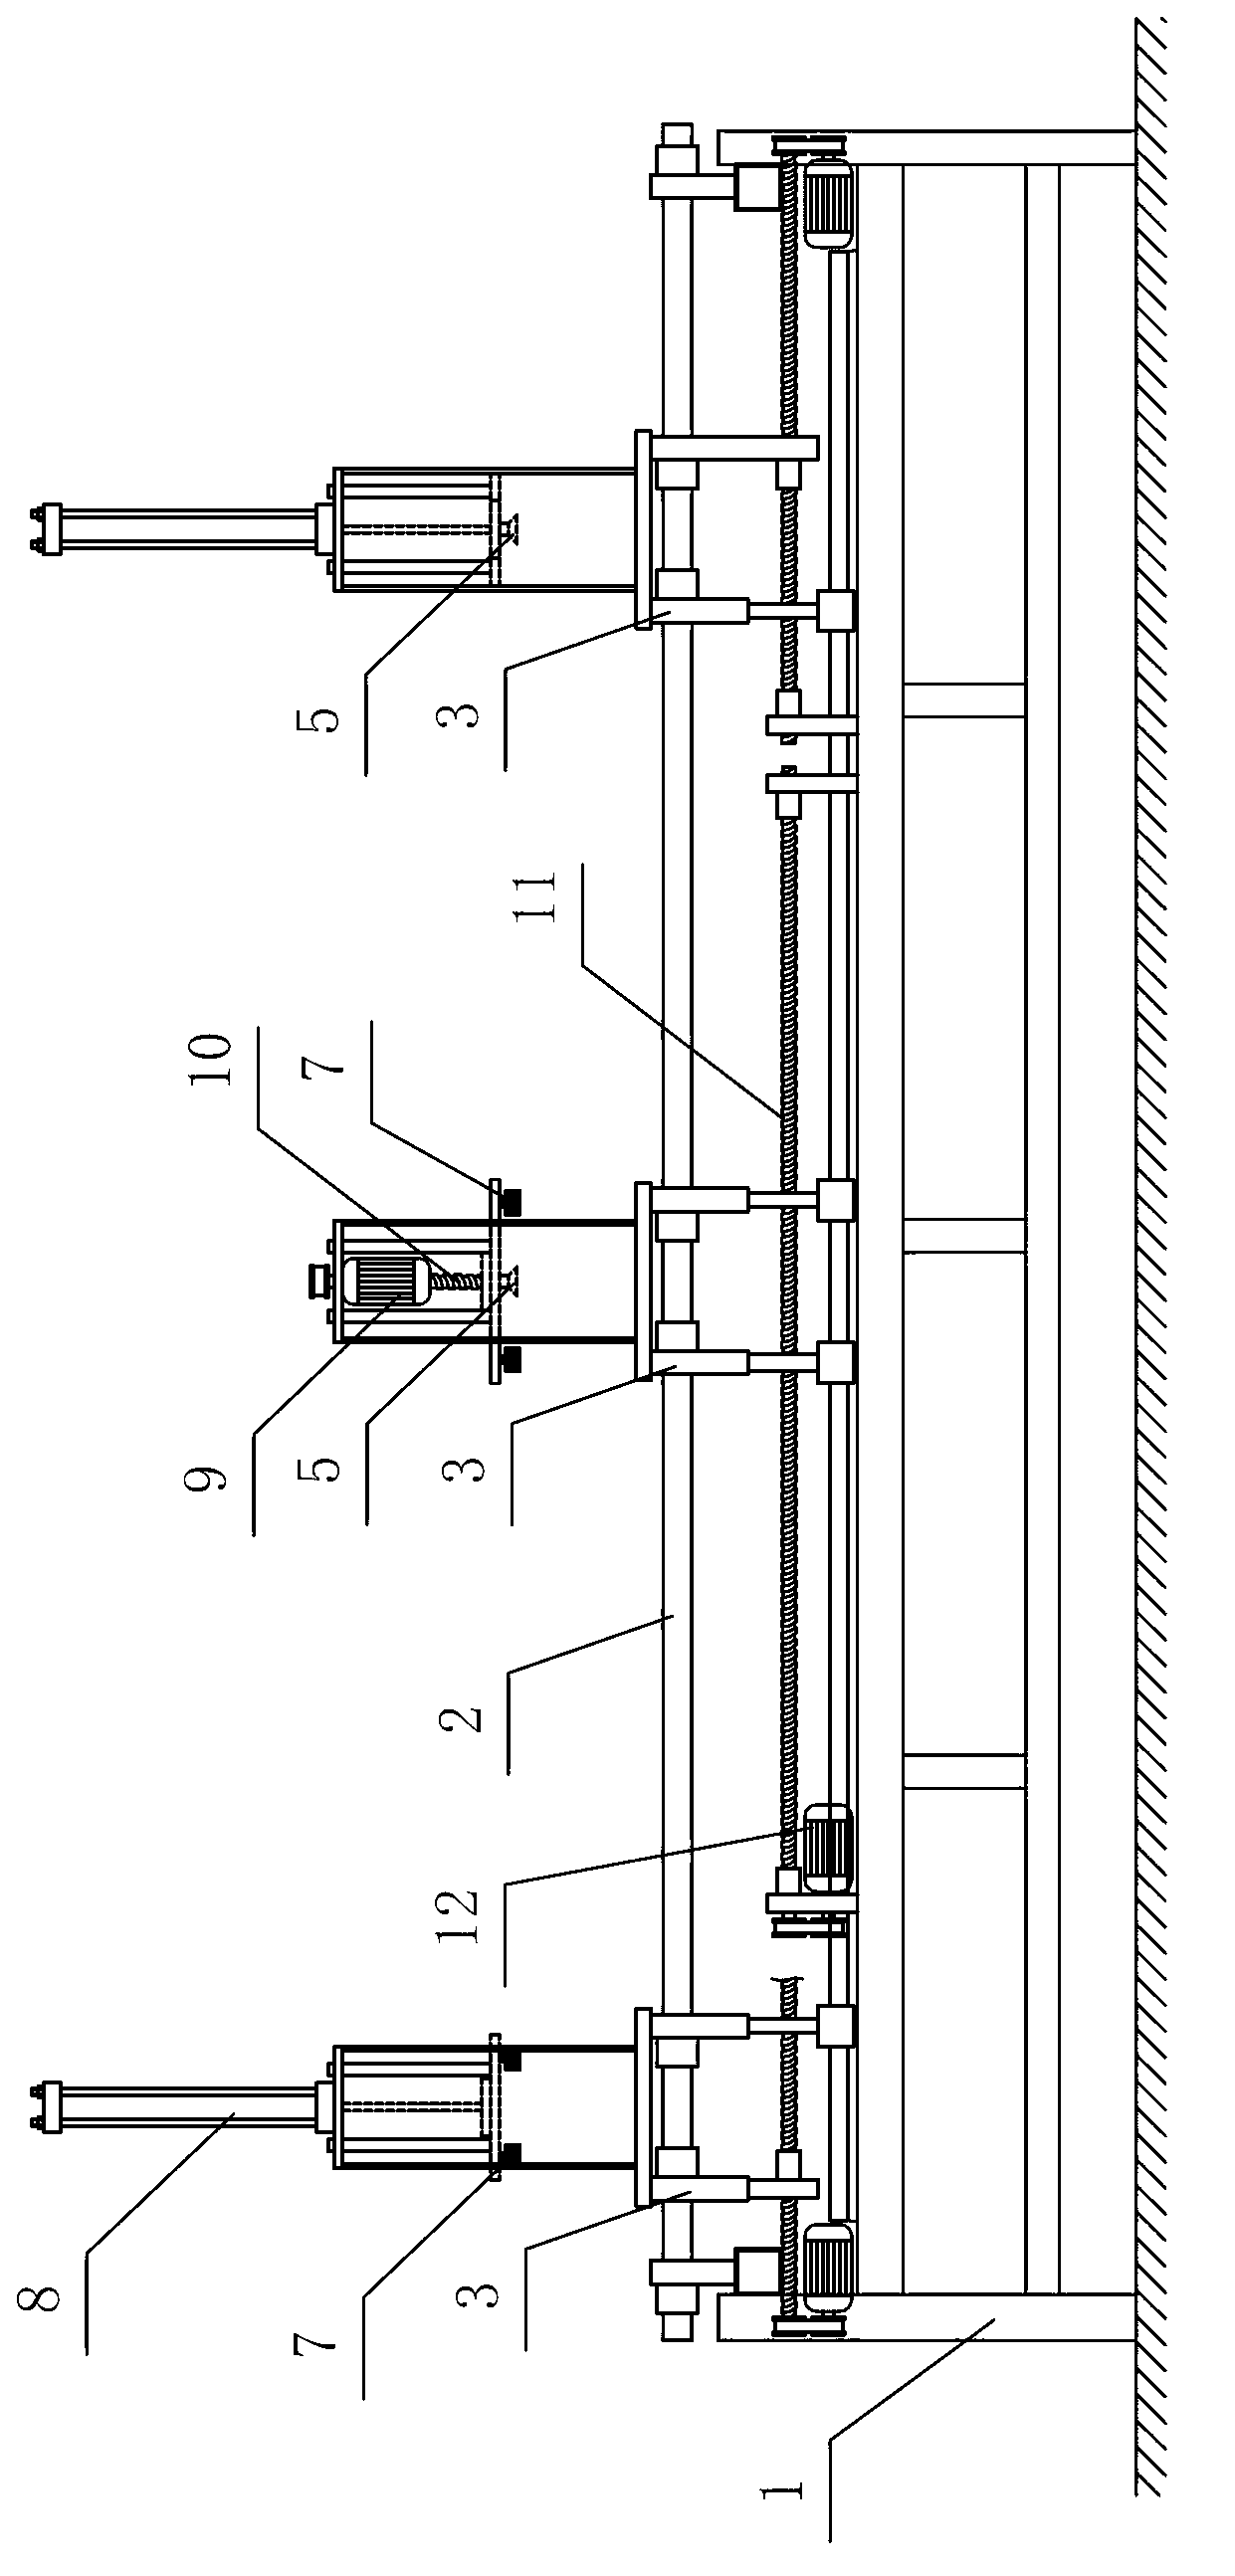 Multi-station automatic feeding device for sheet forming